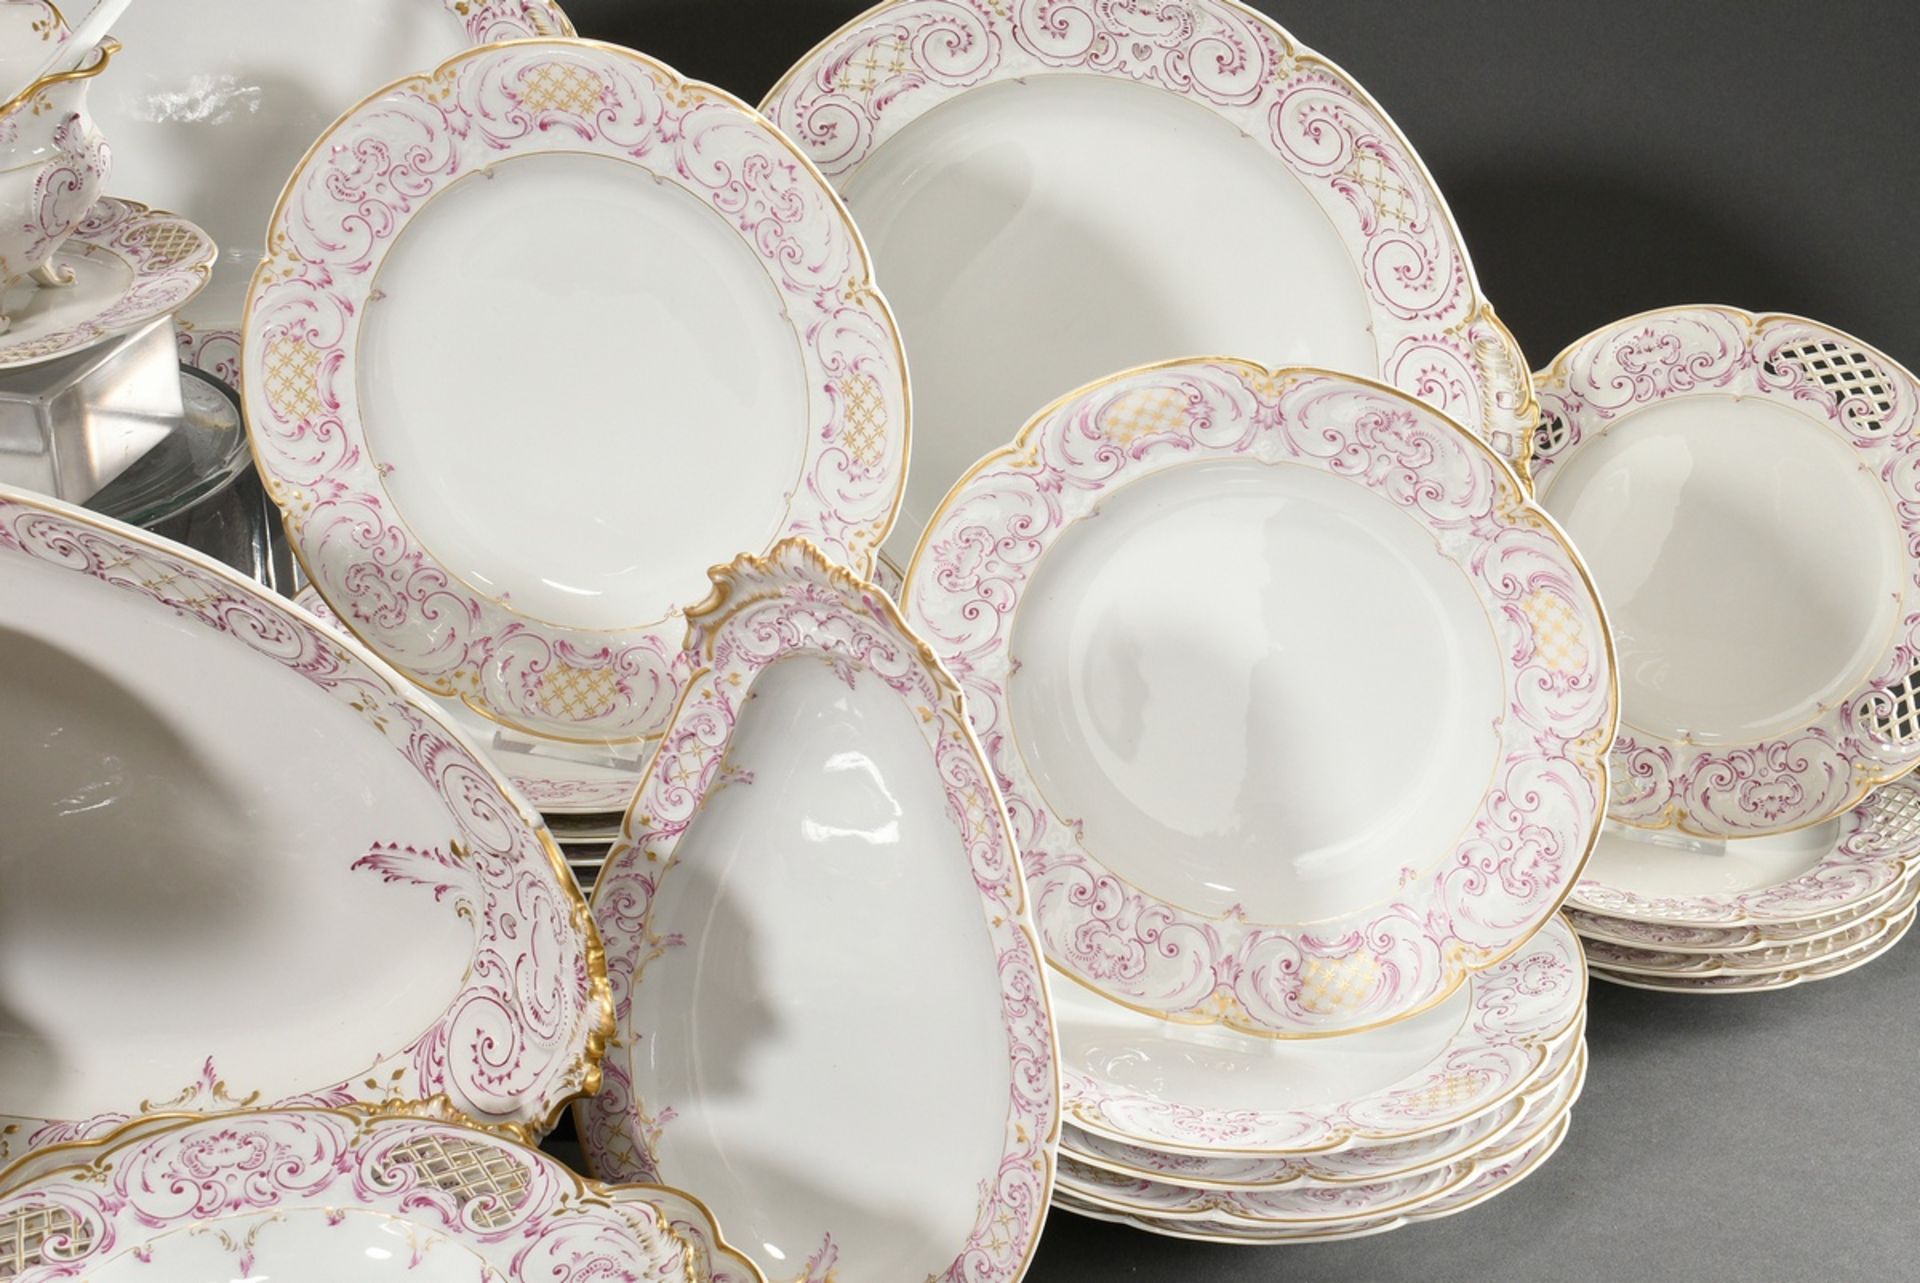 69 Pieces KPM dinner service in Rococo form with purple and gold staffage, red imperial orb mark, c - Image 8 of 22